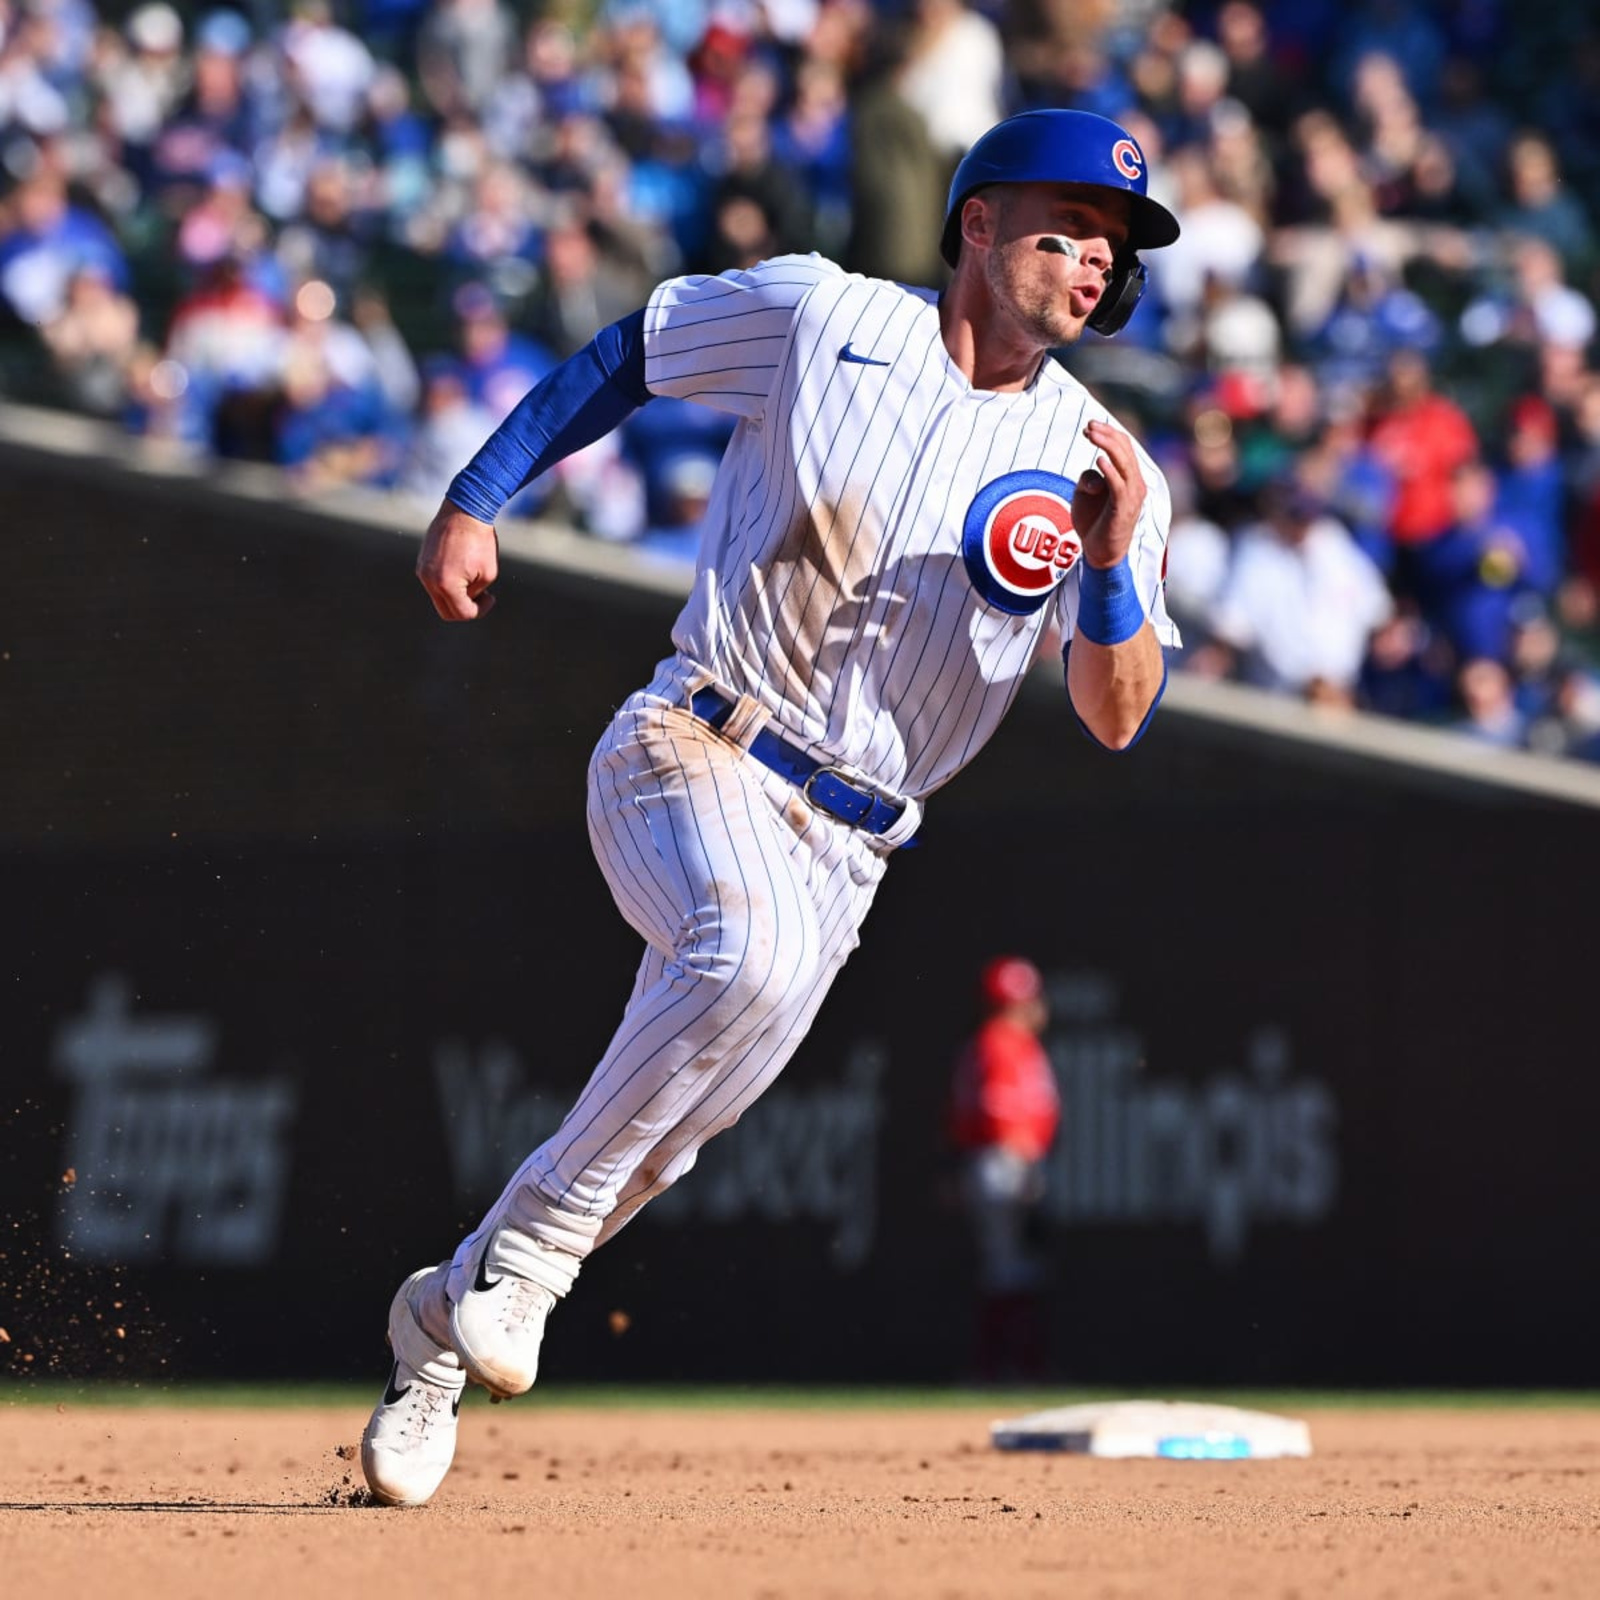 The Cubs should sign Nico Hoerner to a long-term deal - Bleed Cubbie Blue